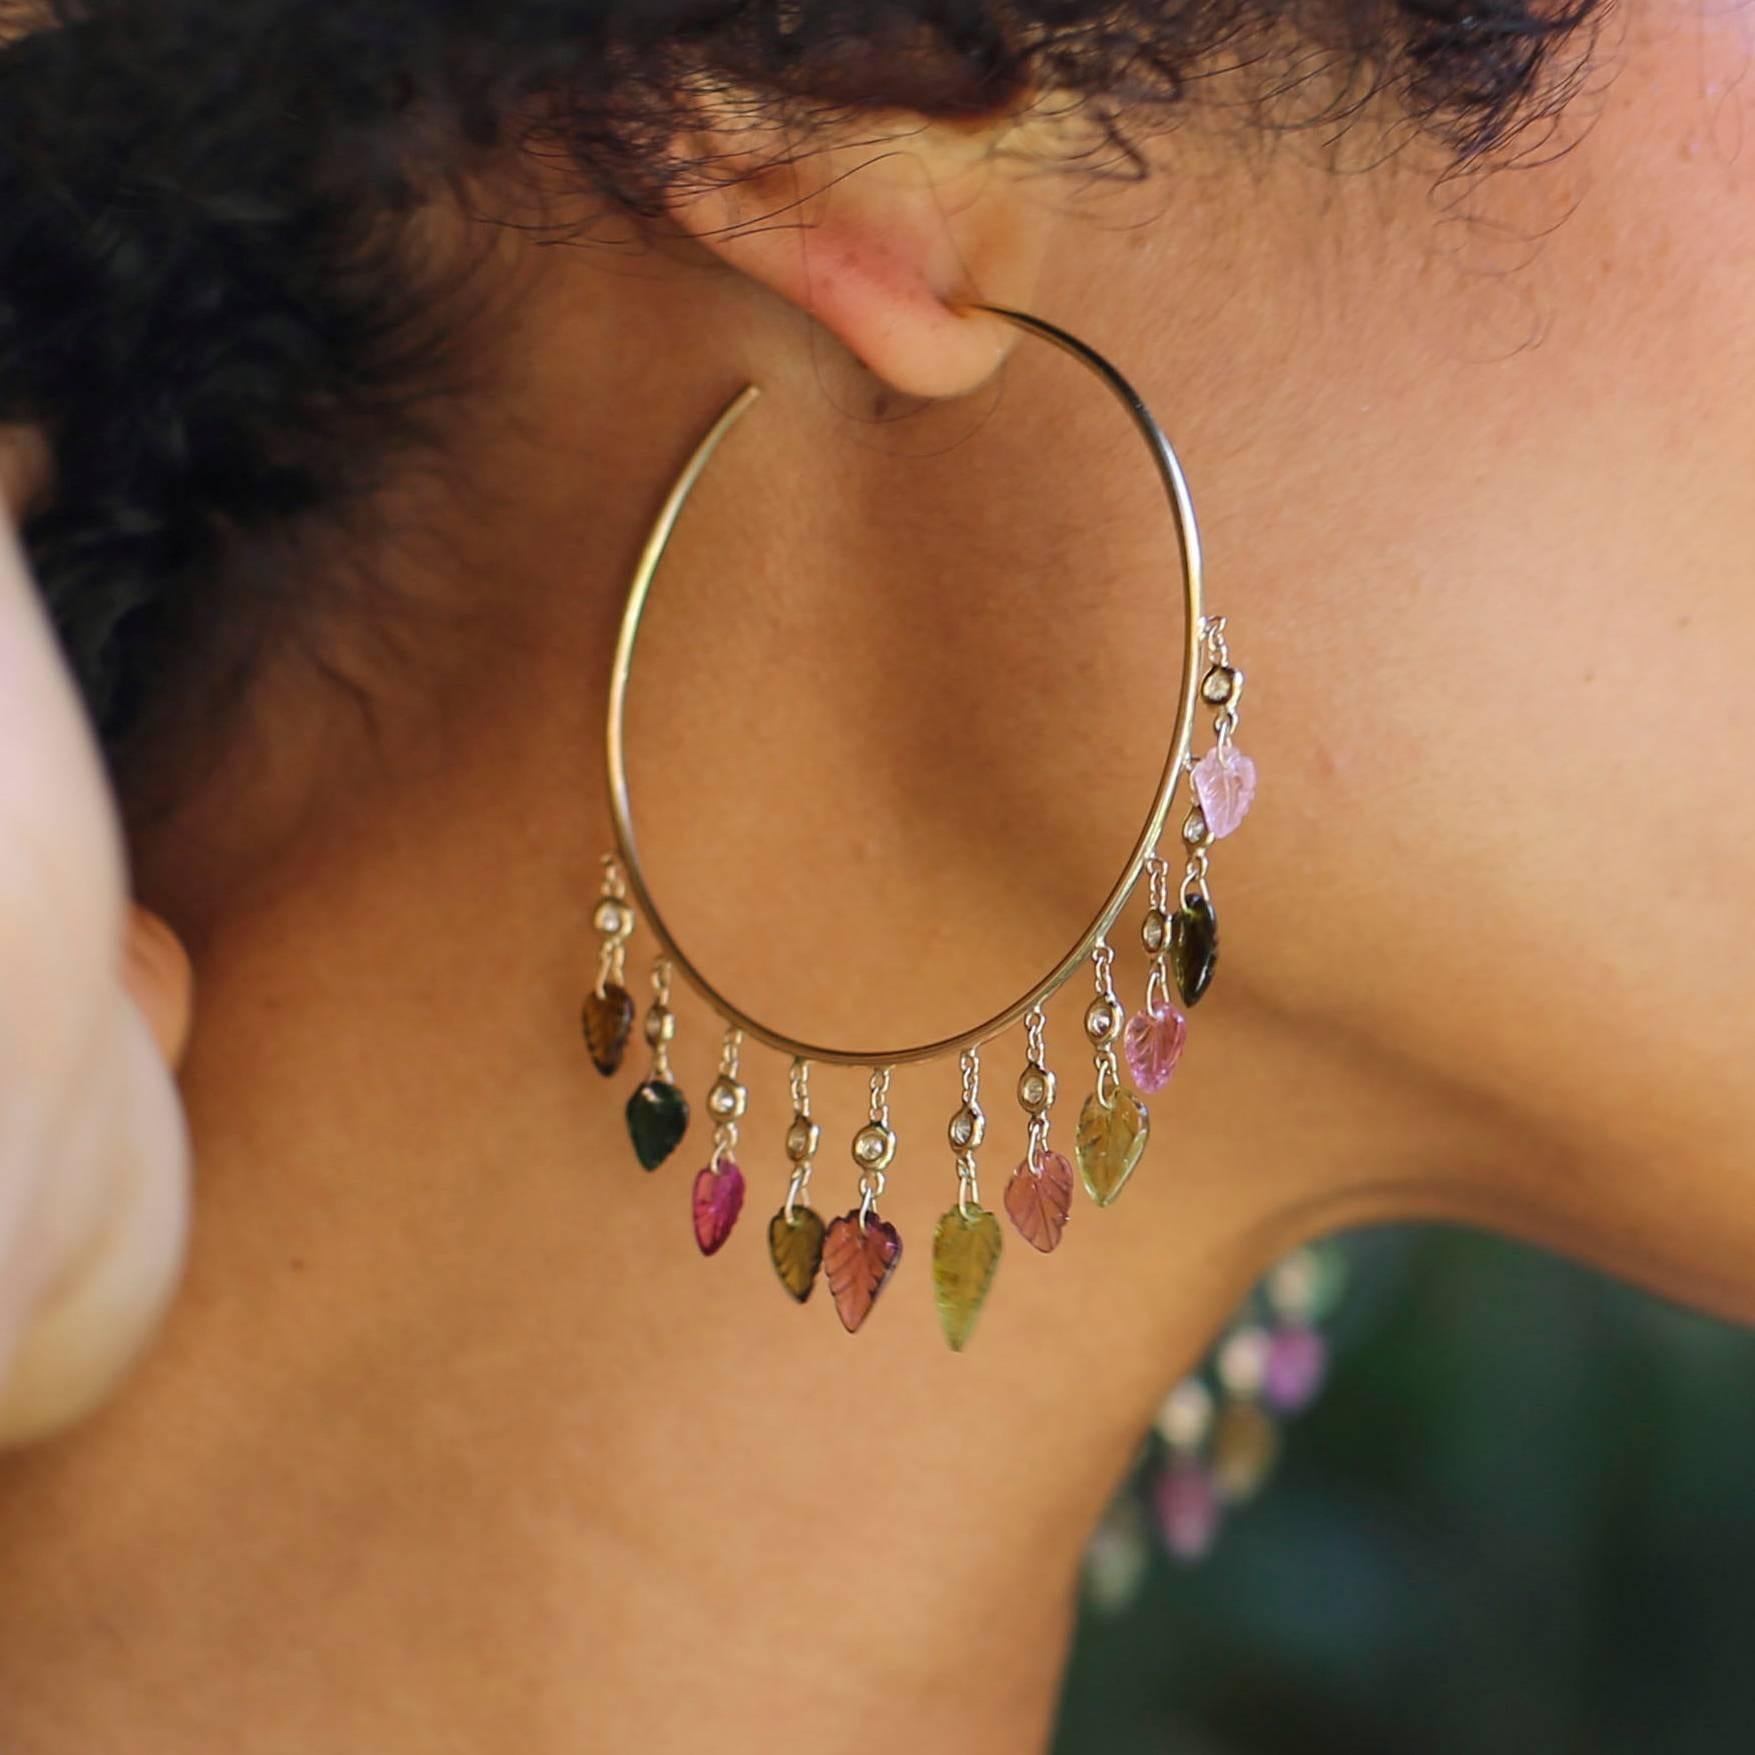 14k Gold Diamond and Tourmaline Leaf Shaker Hoops. Available in Rose, White or Yellow Gold. 2.5